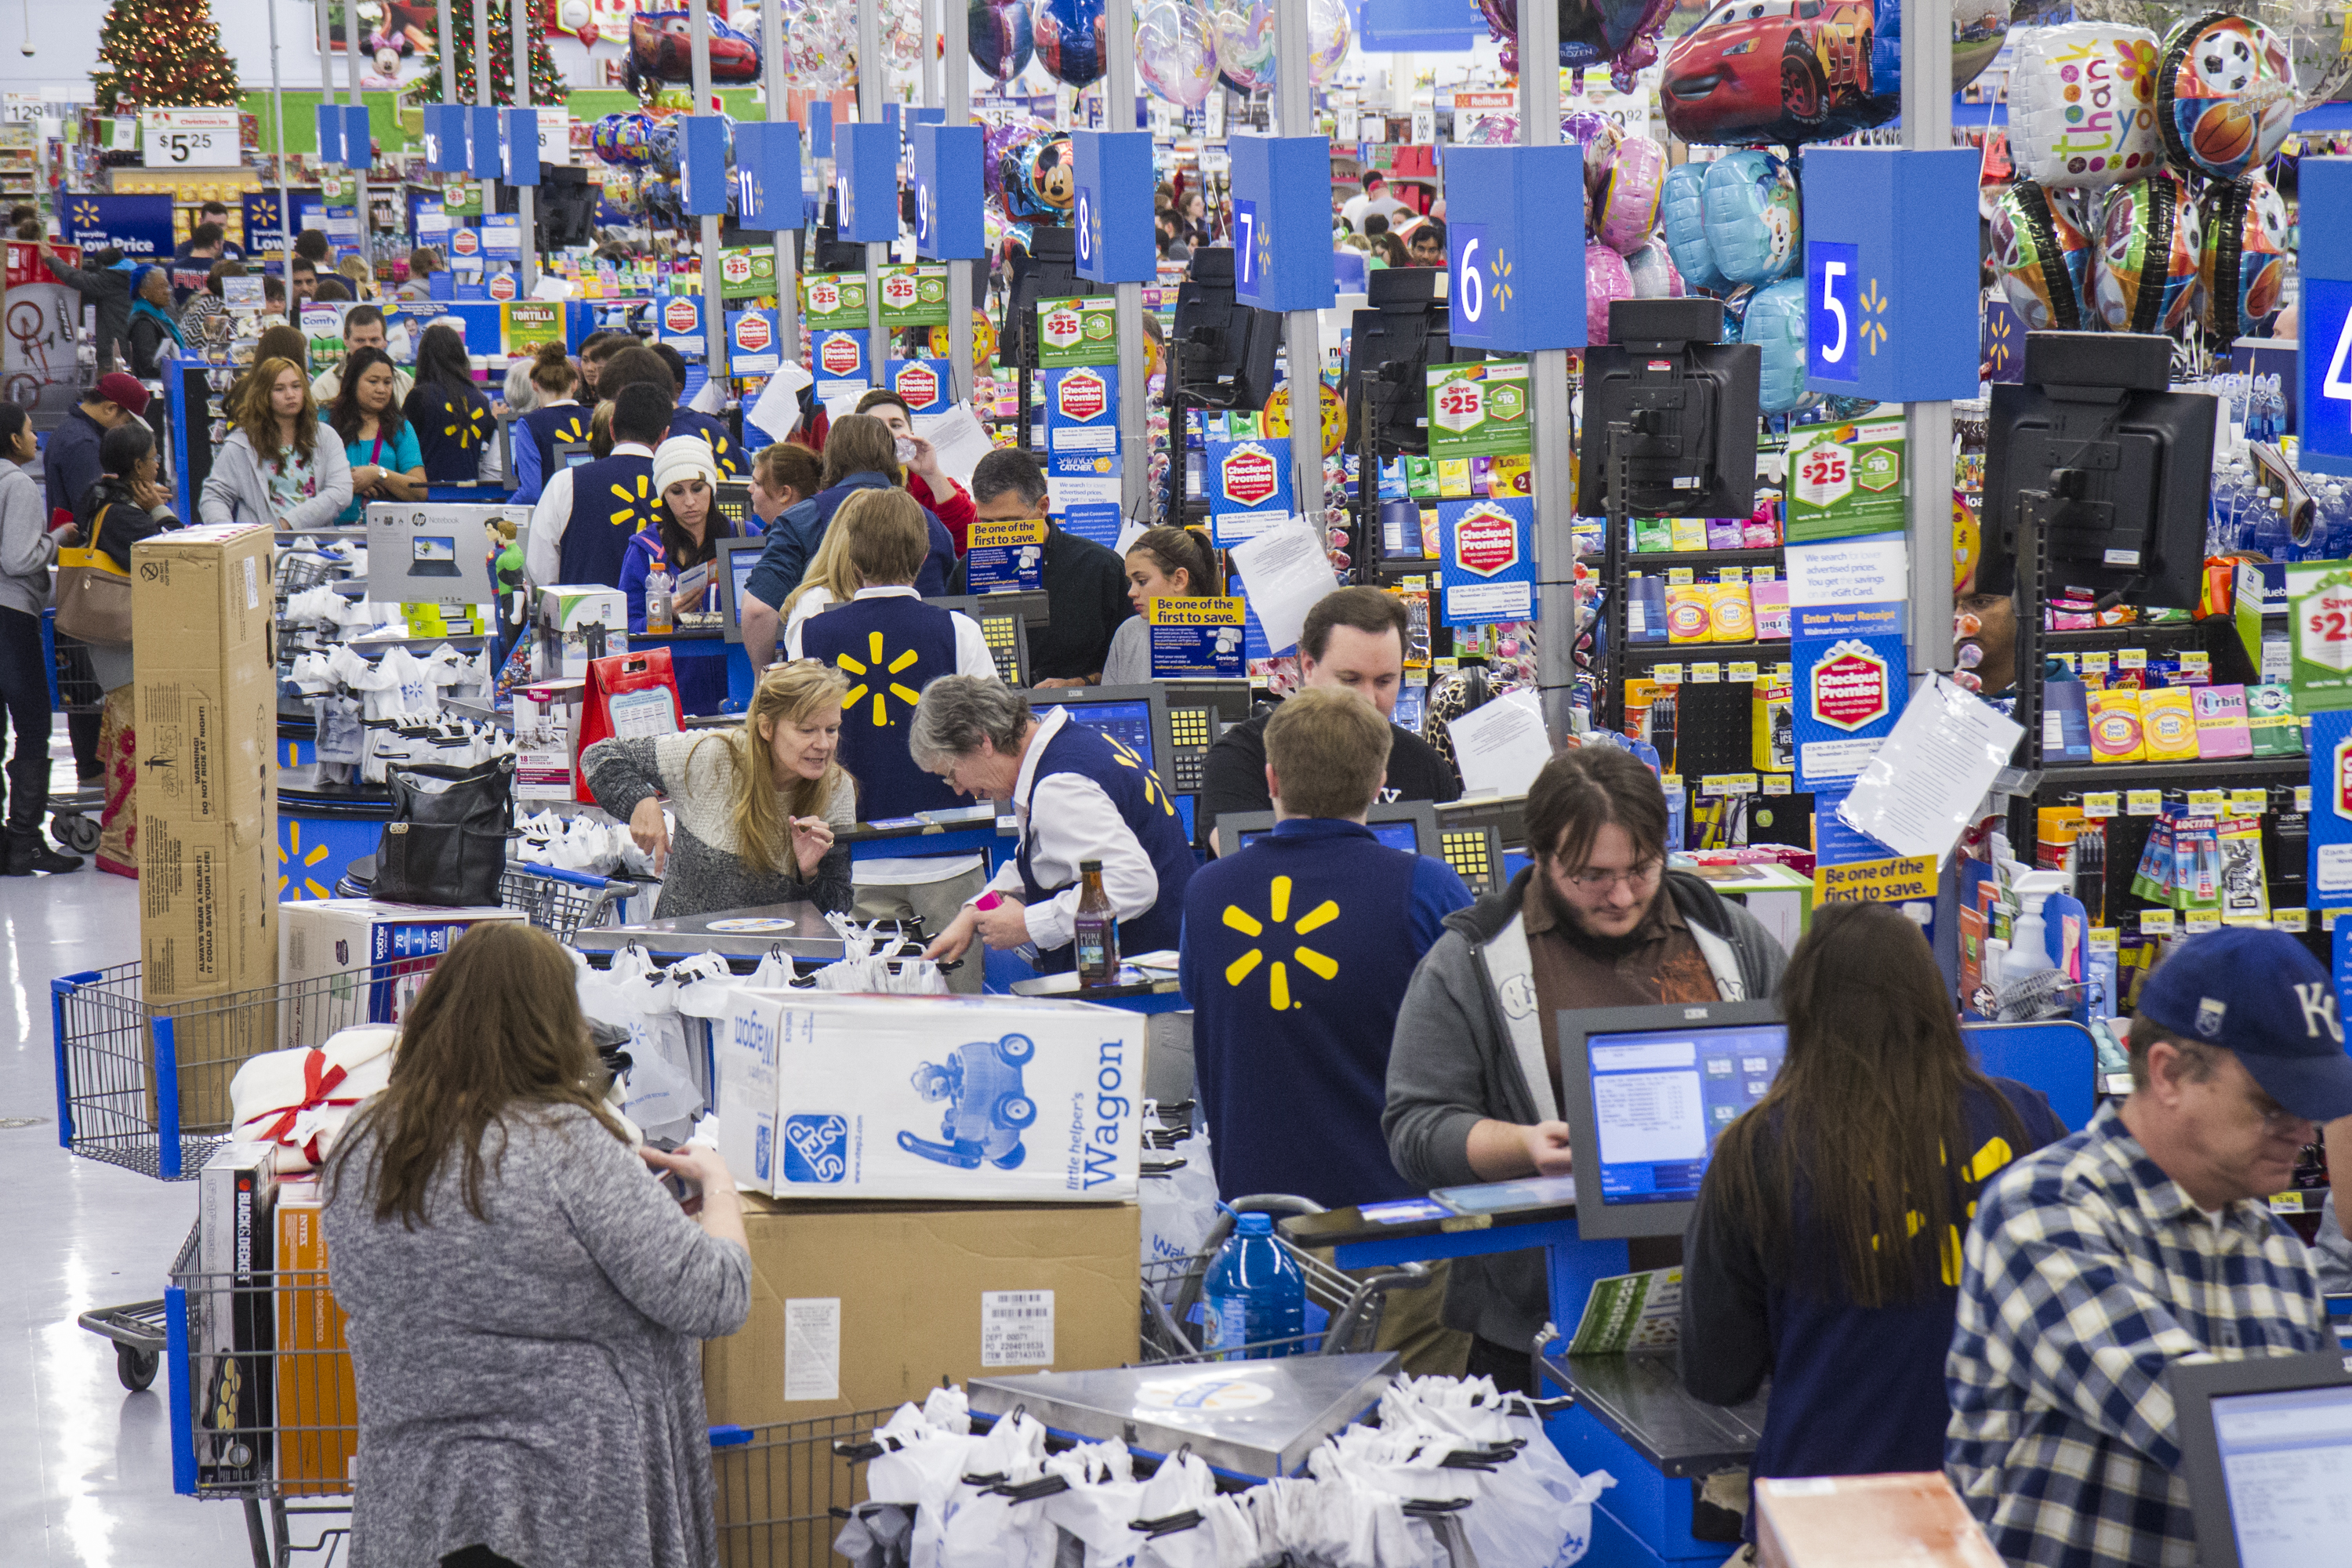 Customers wrap up their holiday shopping during Walmart's Black Friday